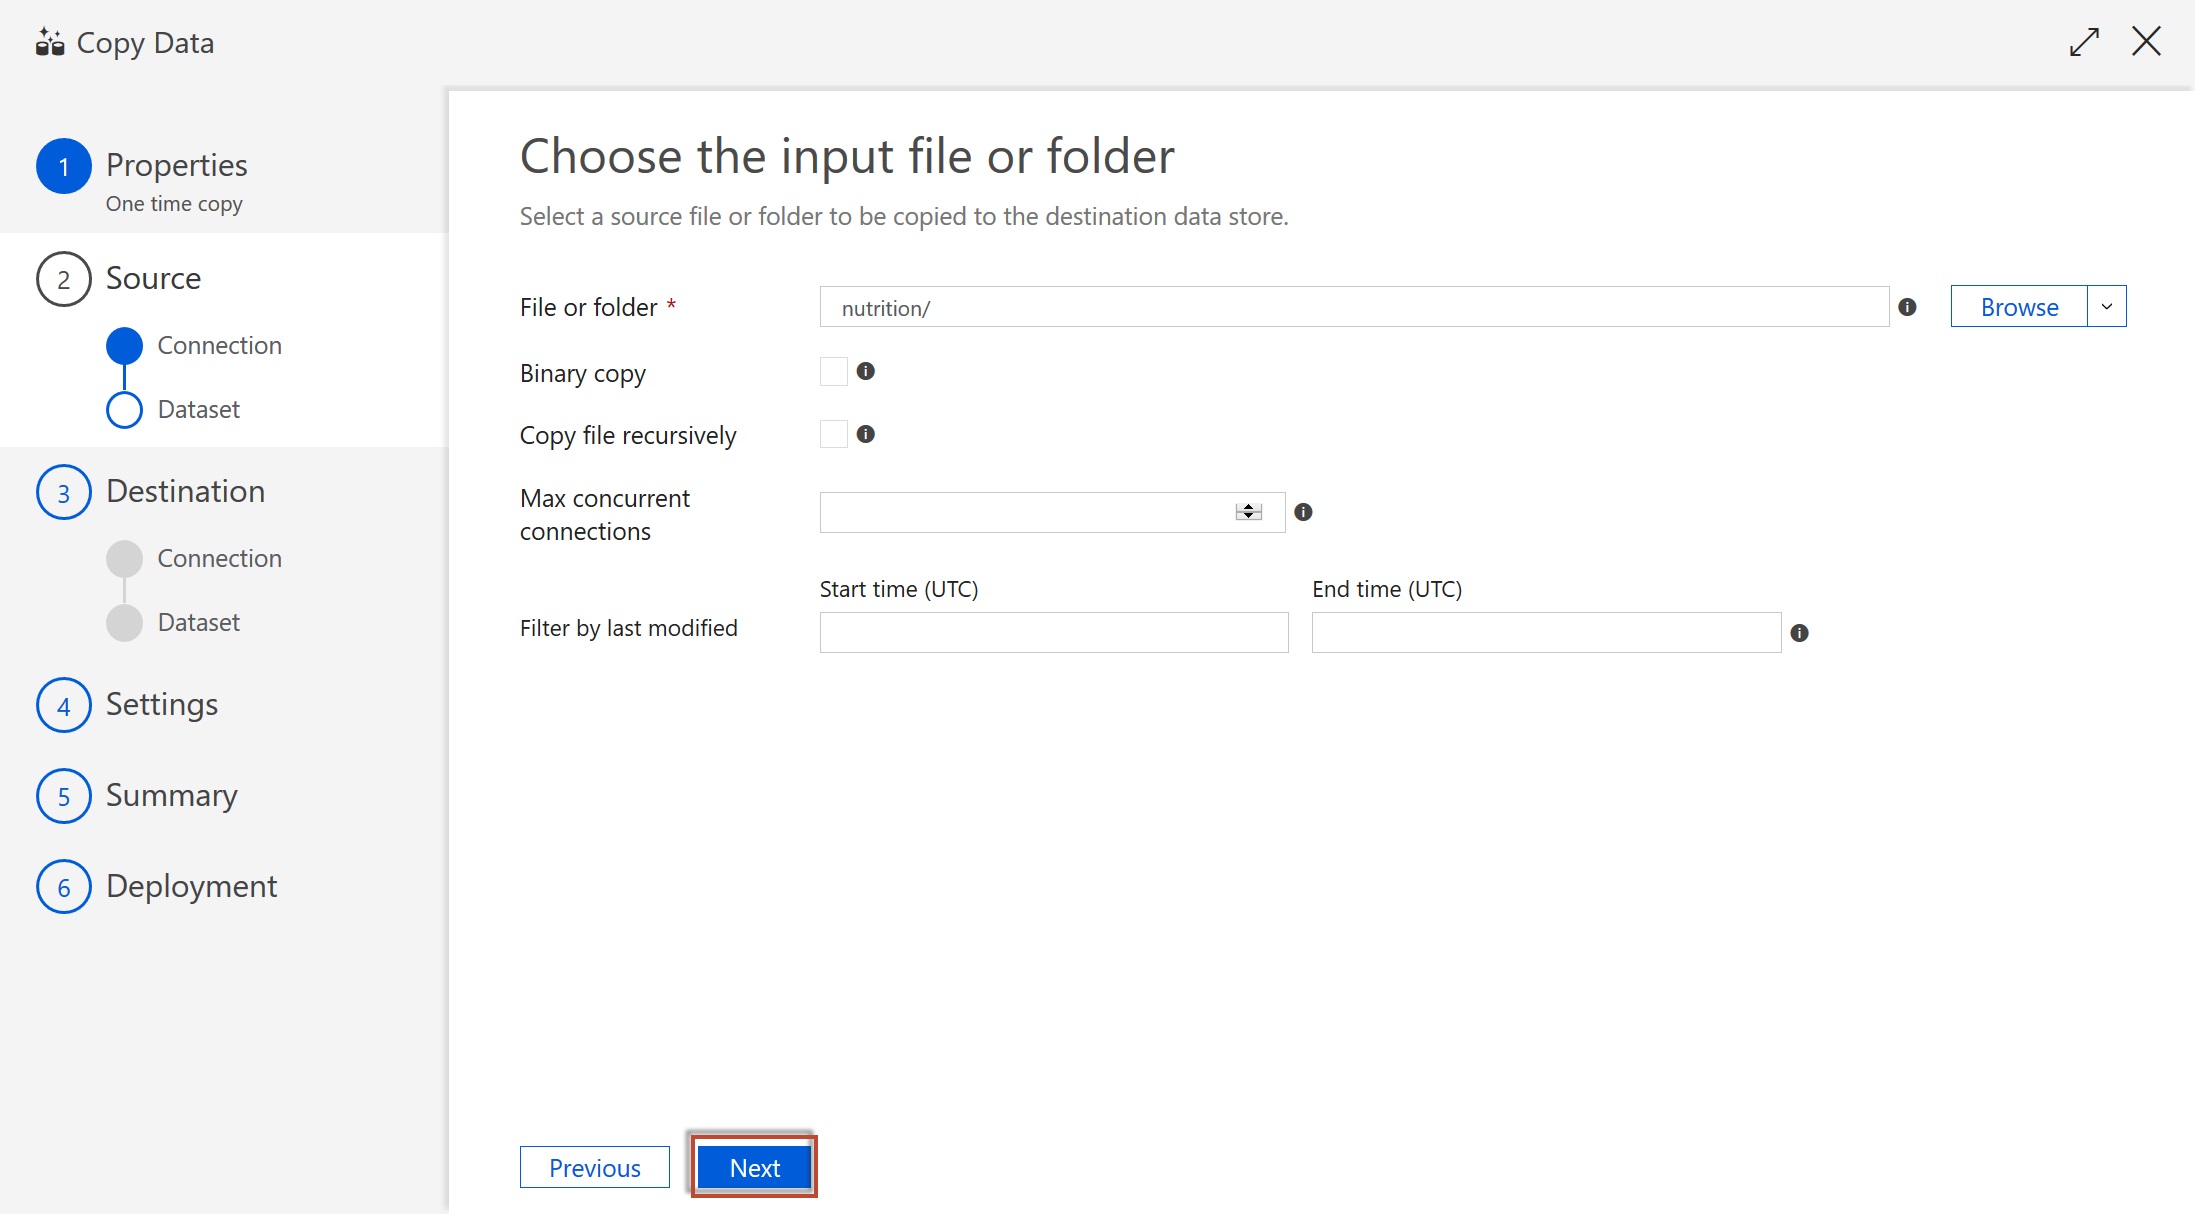 The input file or folder dialog is displayed